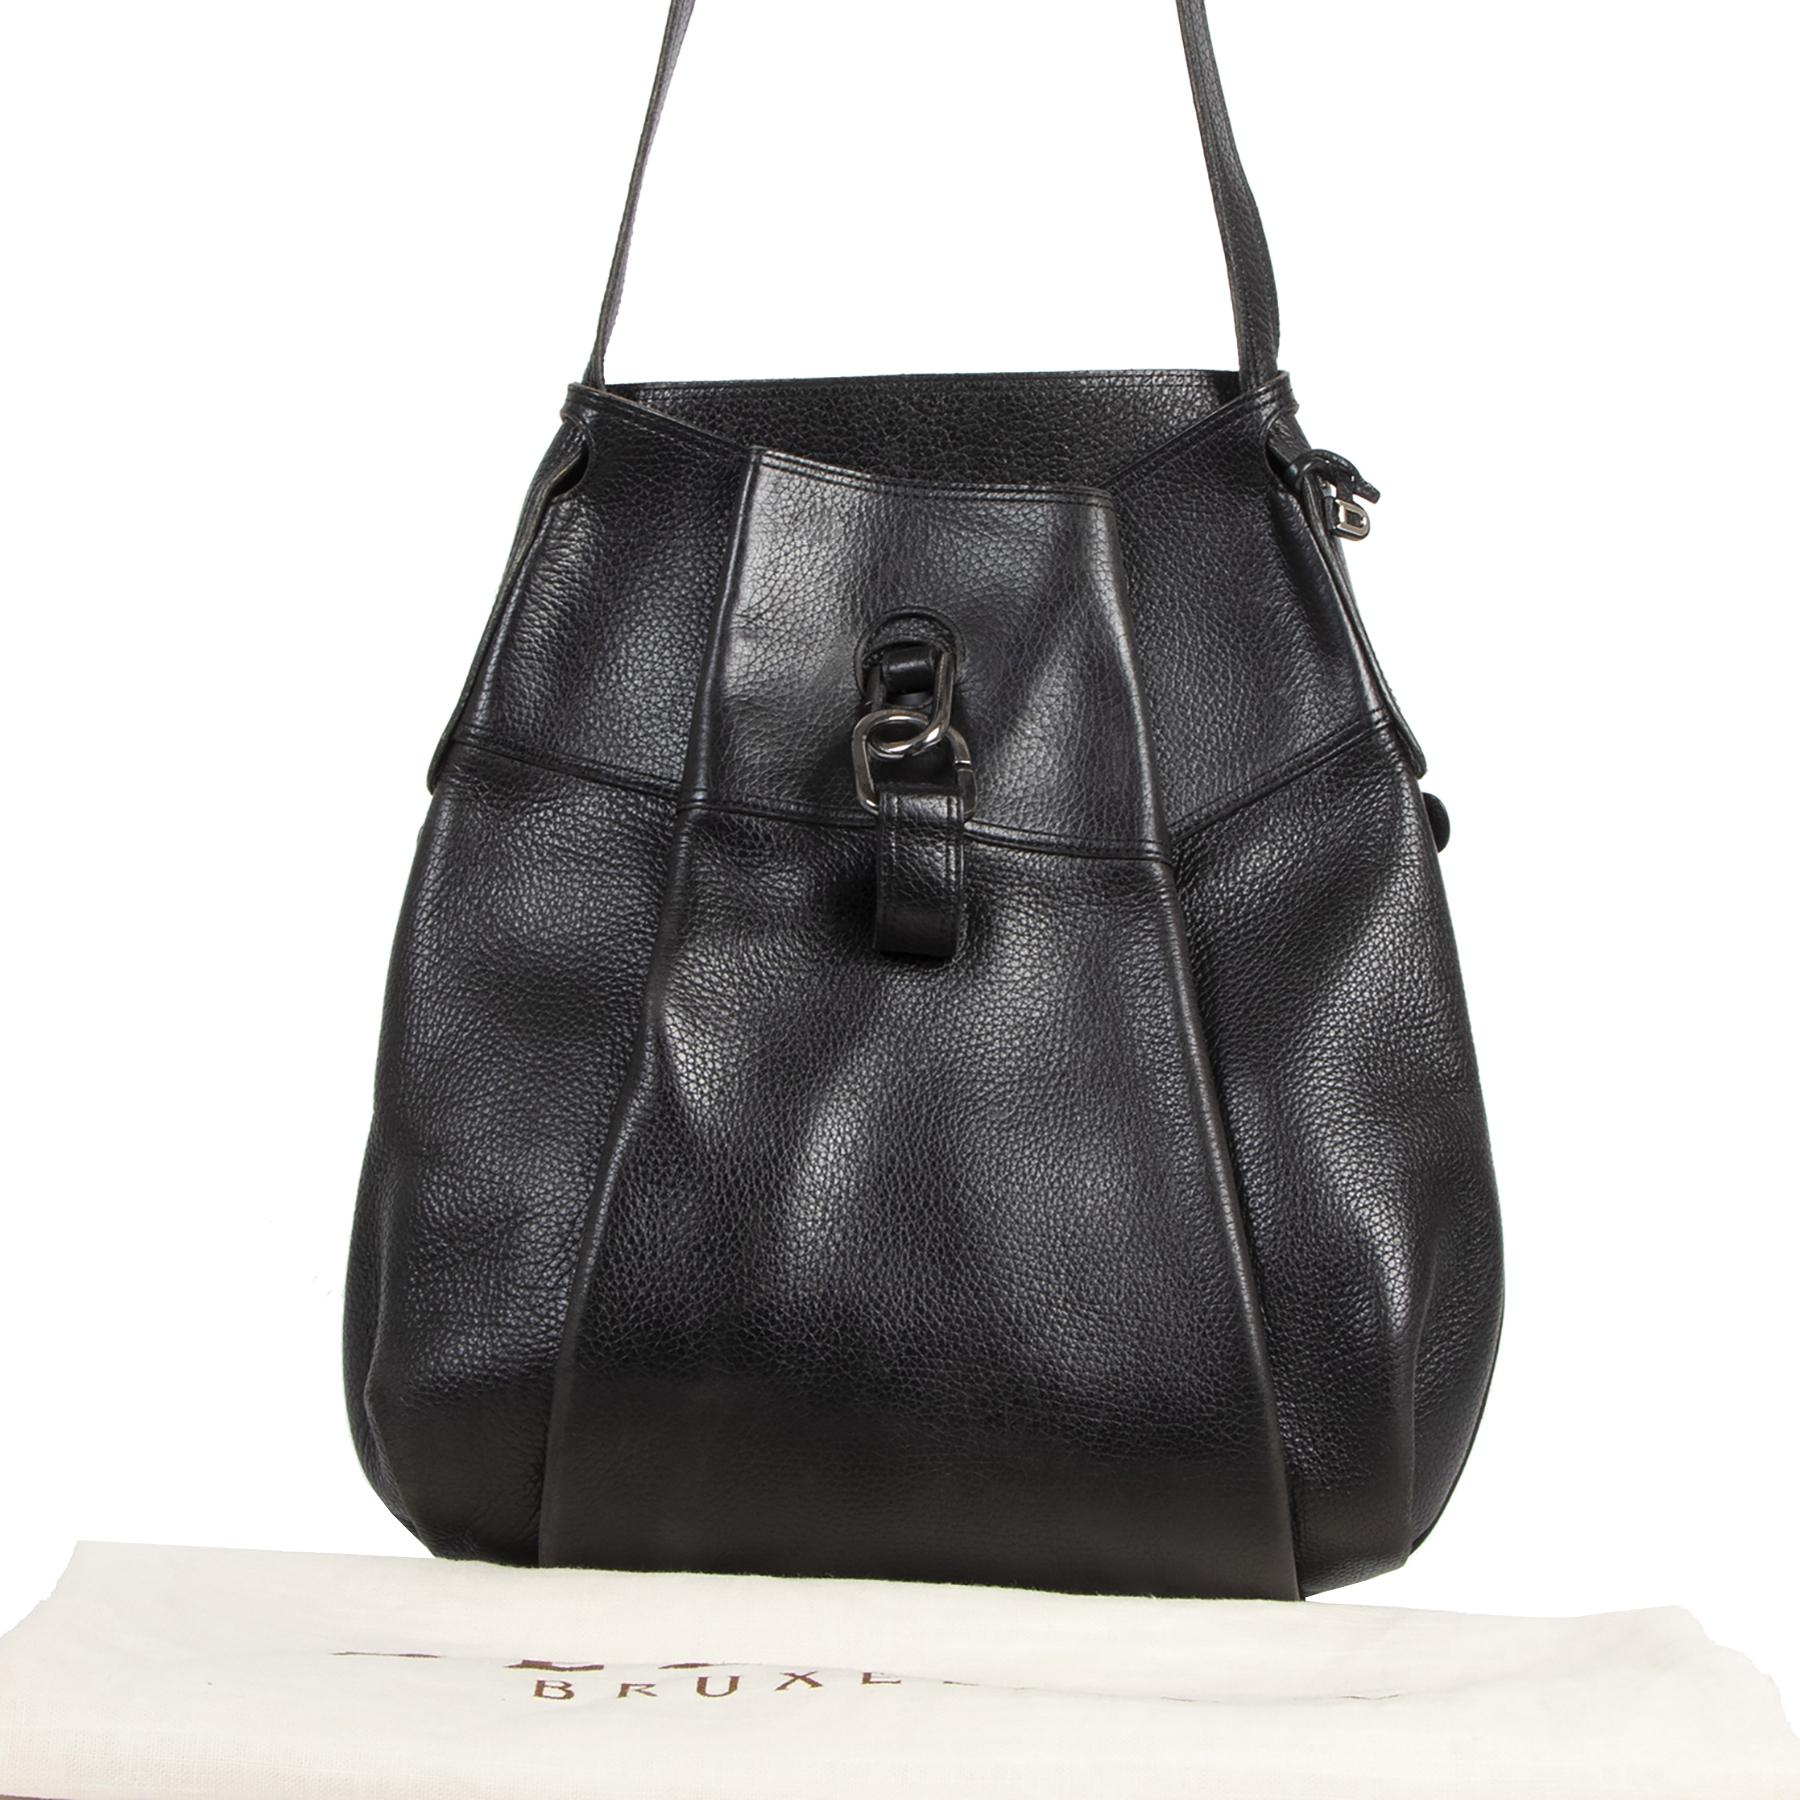 Good condition

Delvaux Black Faust Bag 

The Delvaux Faust is definitely a classic one, first designed in 1987. This Delvaux is crafted in black leather and features Black hardware. The bag opens with a zip pocket in the back, but there is also a